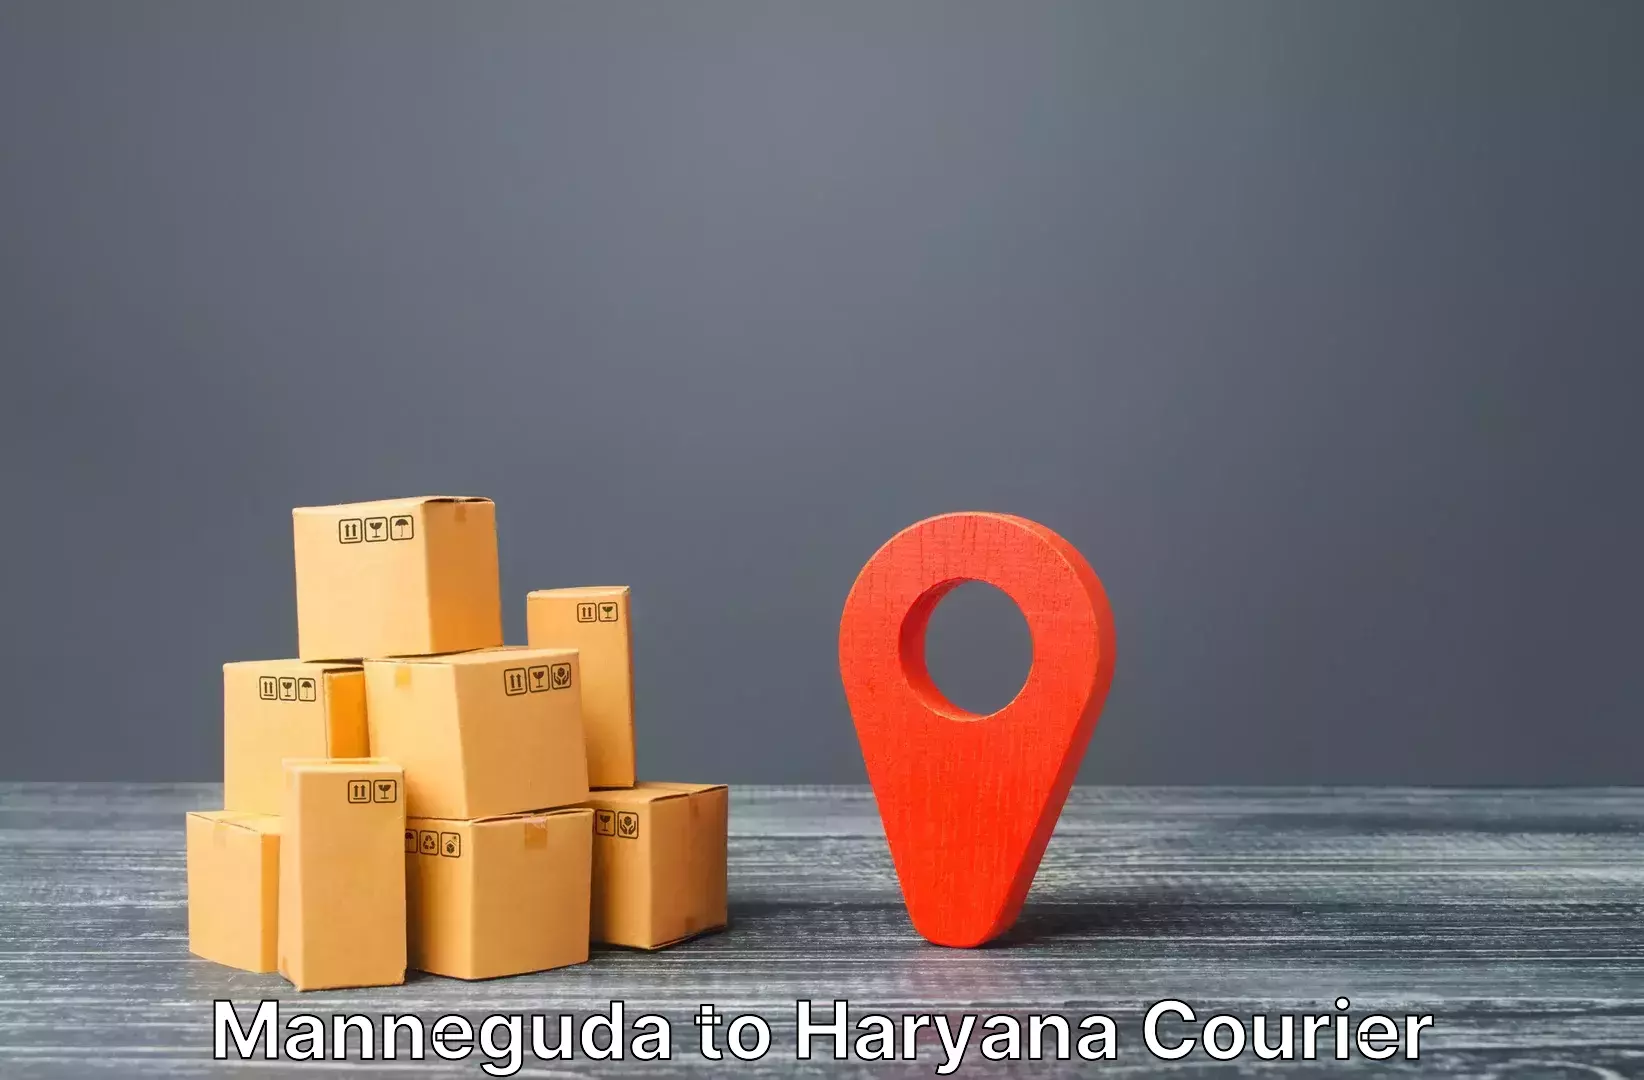 Quick luggage shipment in Manneguda to Chirya